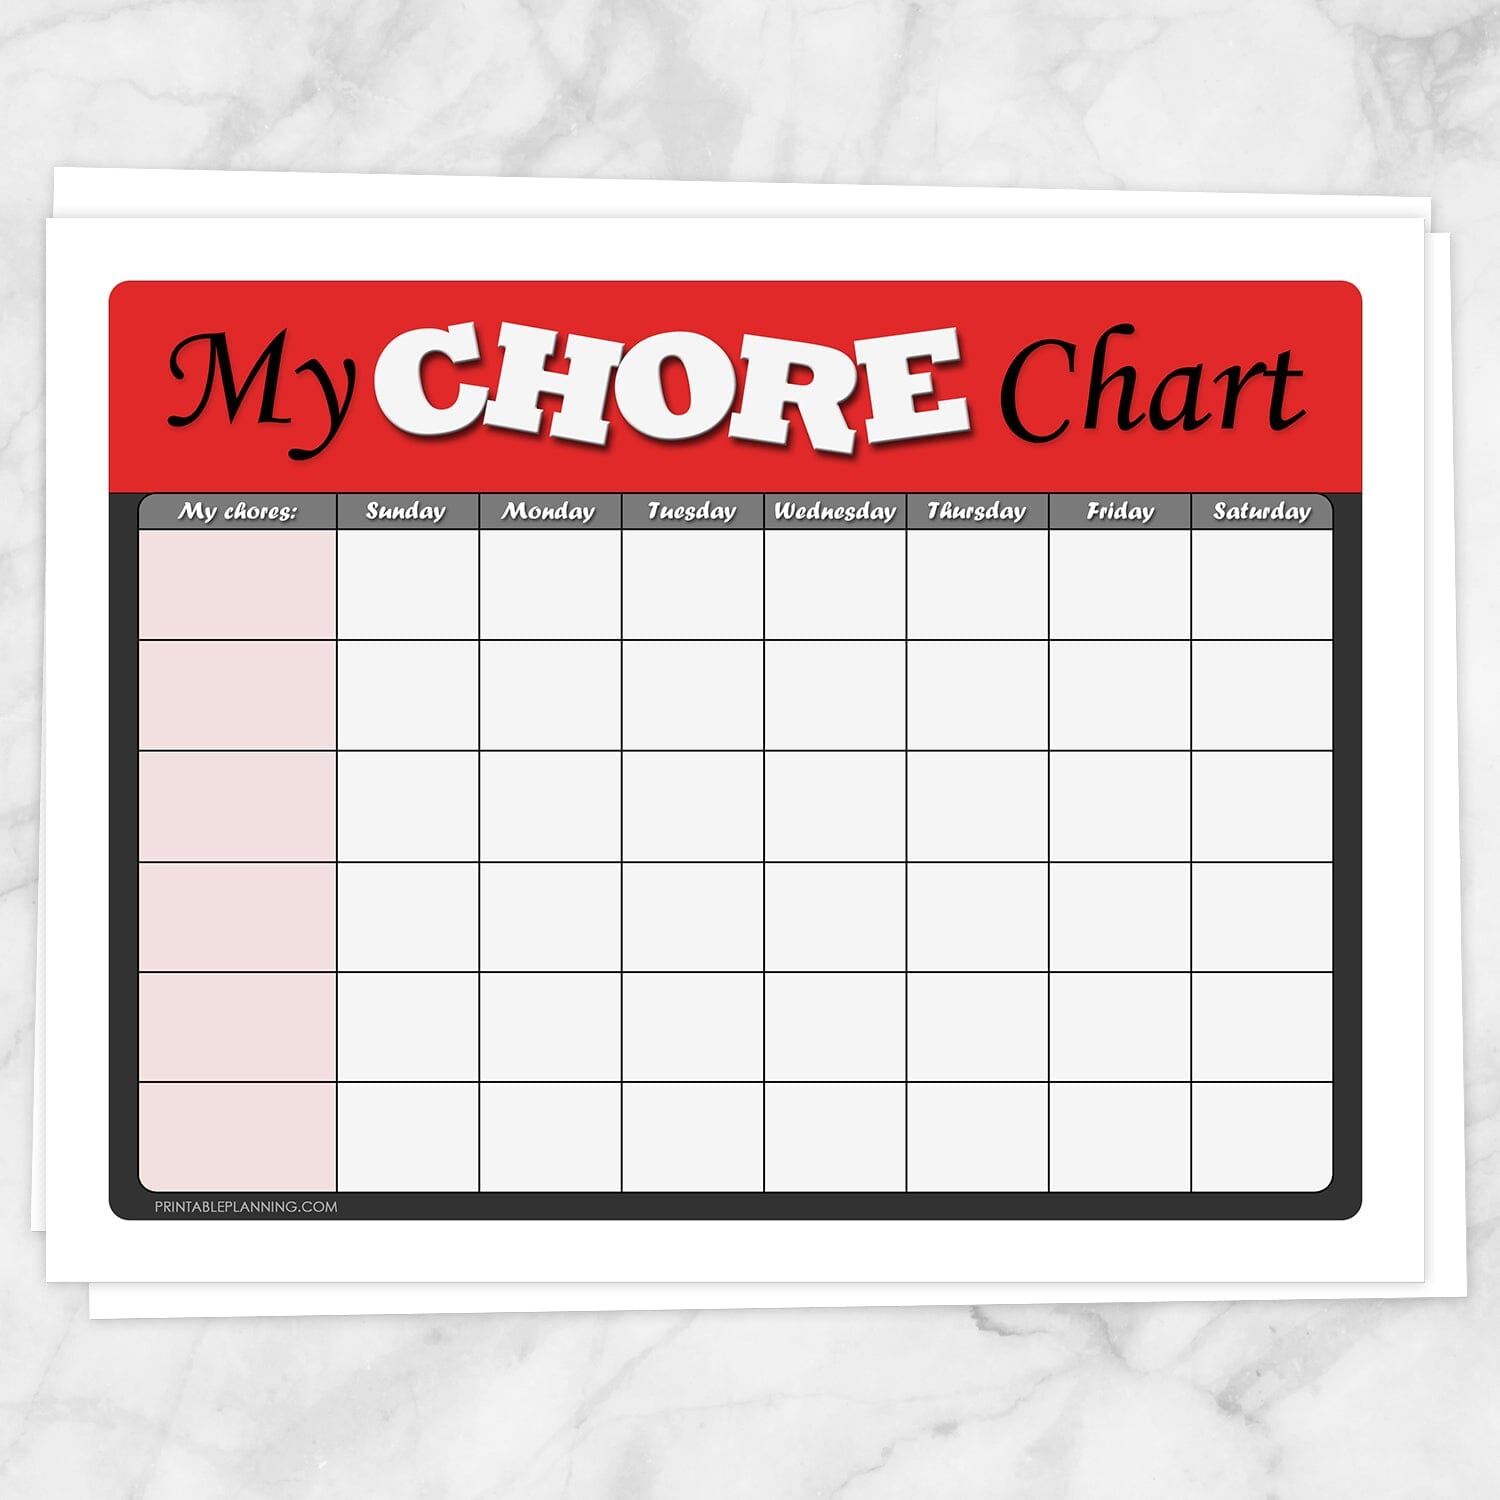 Printable Kids Chore Chart - Red 'My Chore Chart' Weekly Page at Printable Planning.